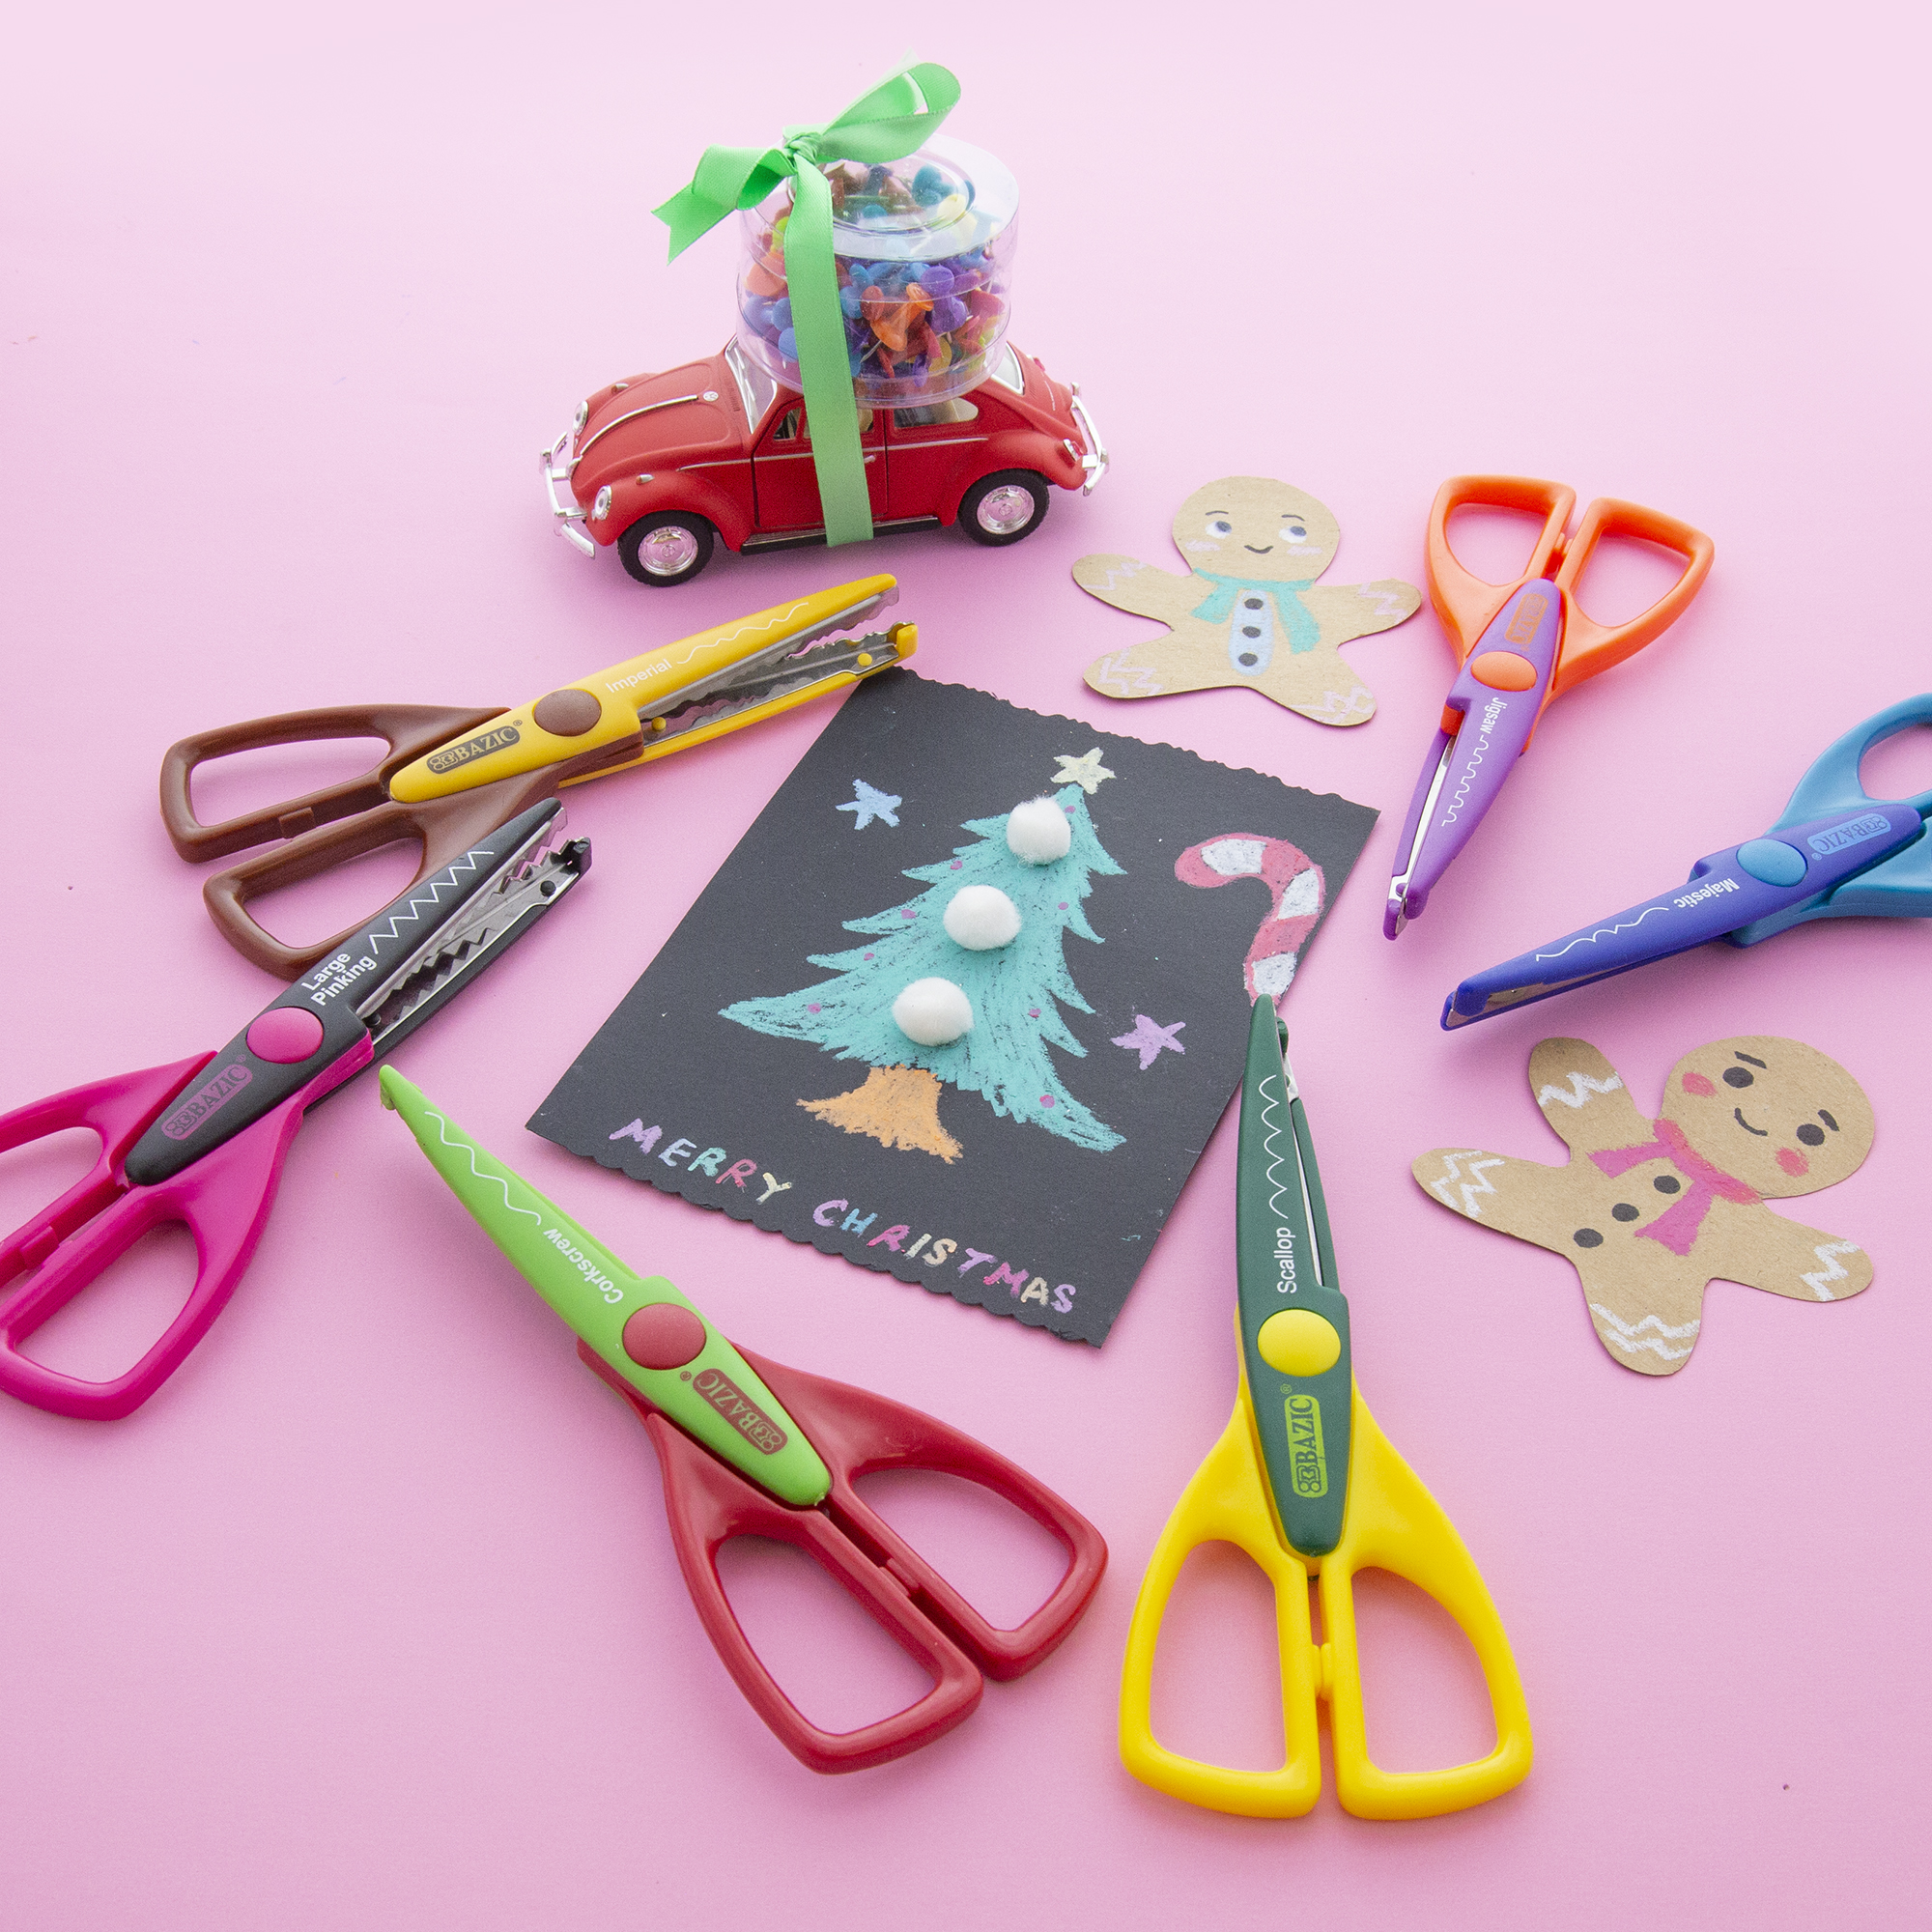 Craft scissors, Must-have tools for toy makers